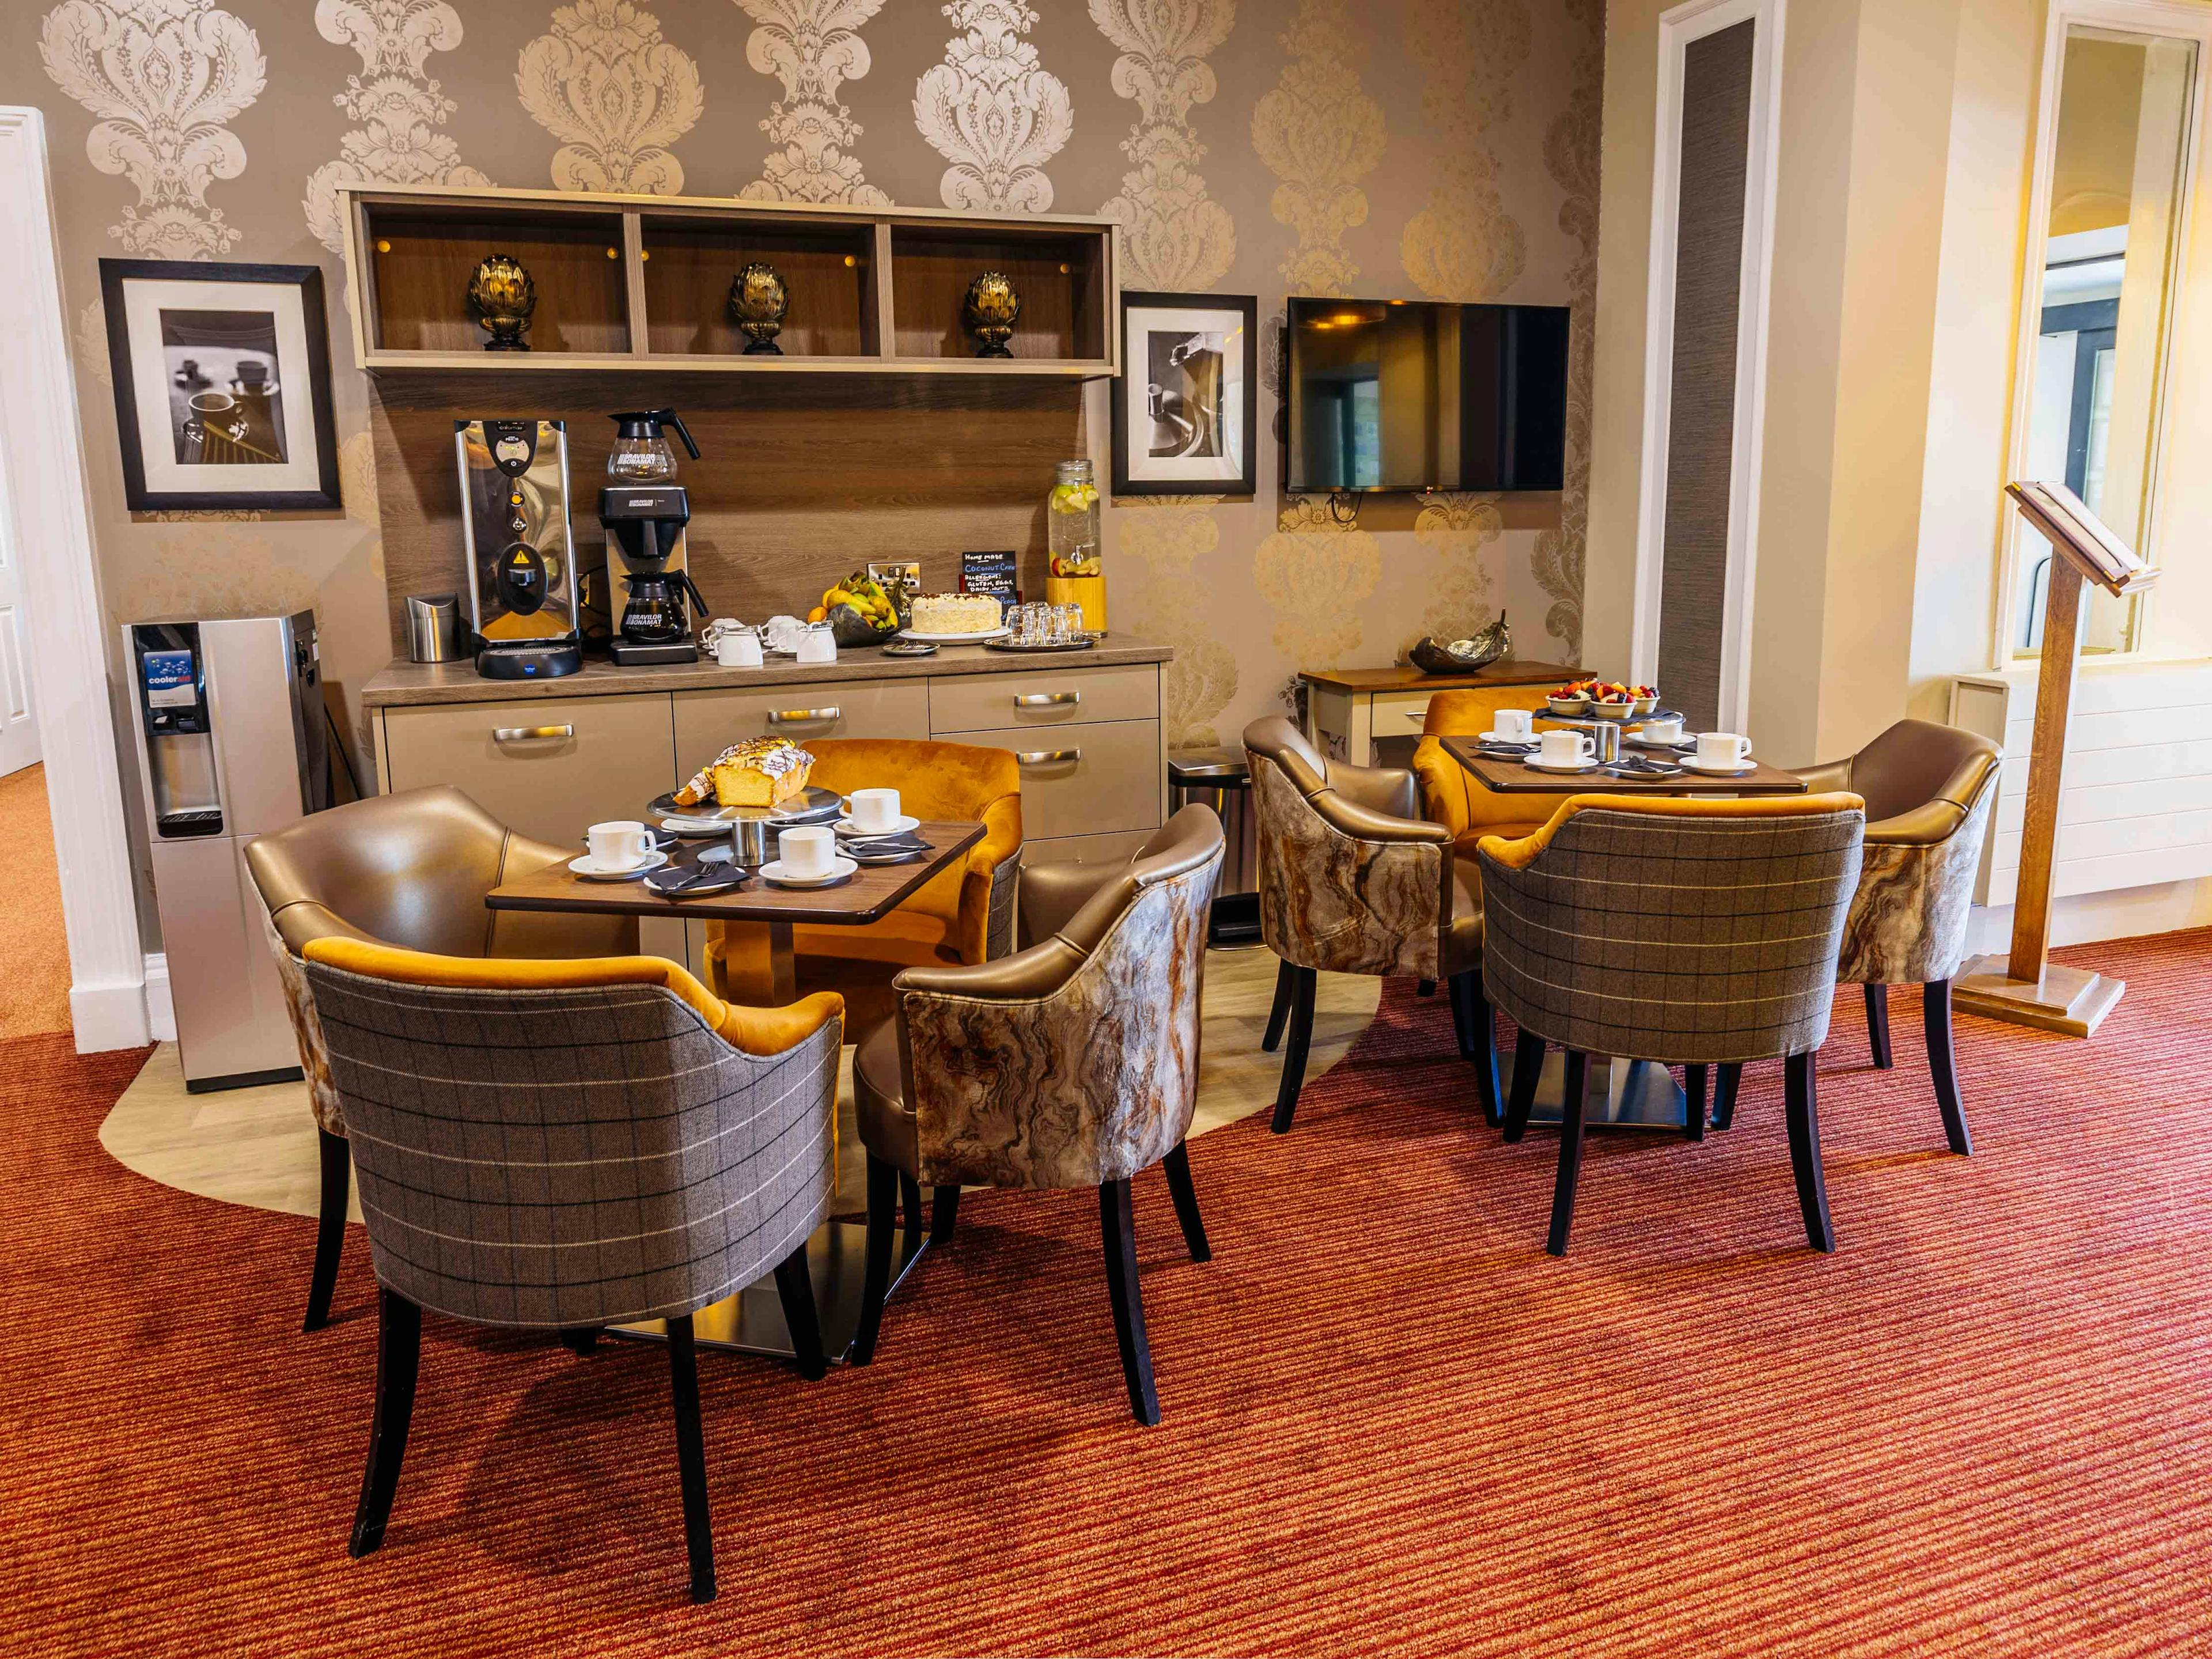 Cafe at Lawton Manor Care Home in Kidsgrove, Newcastle-under-Lyme